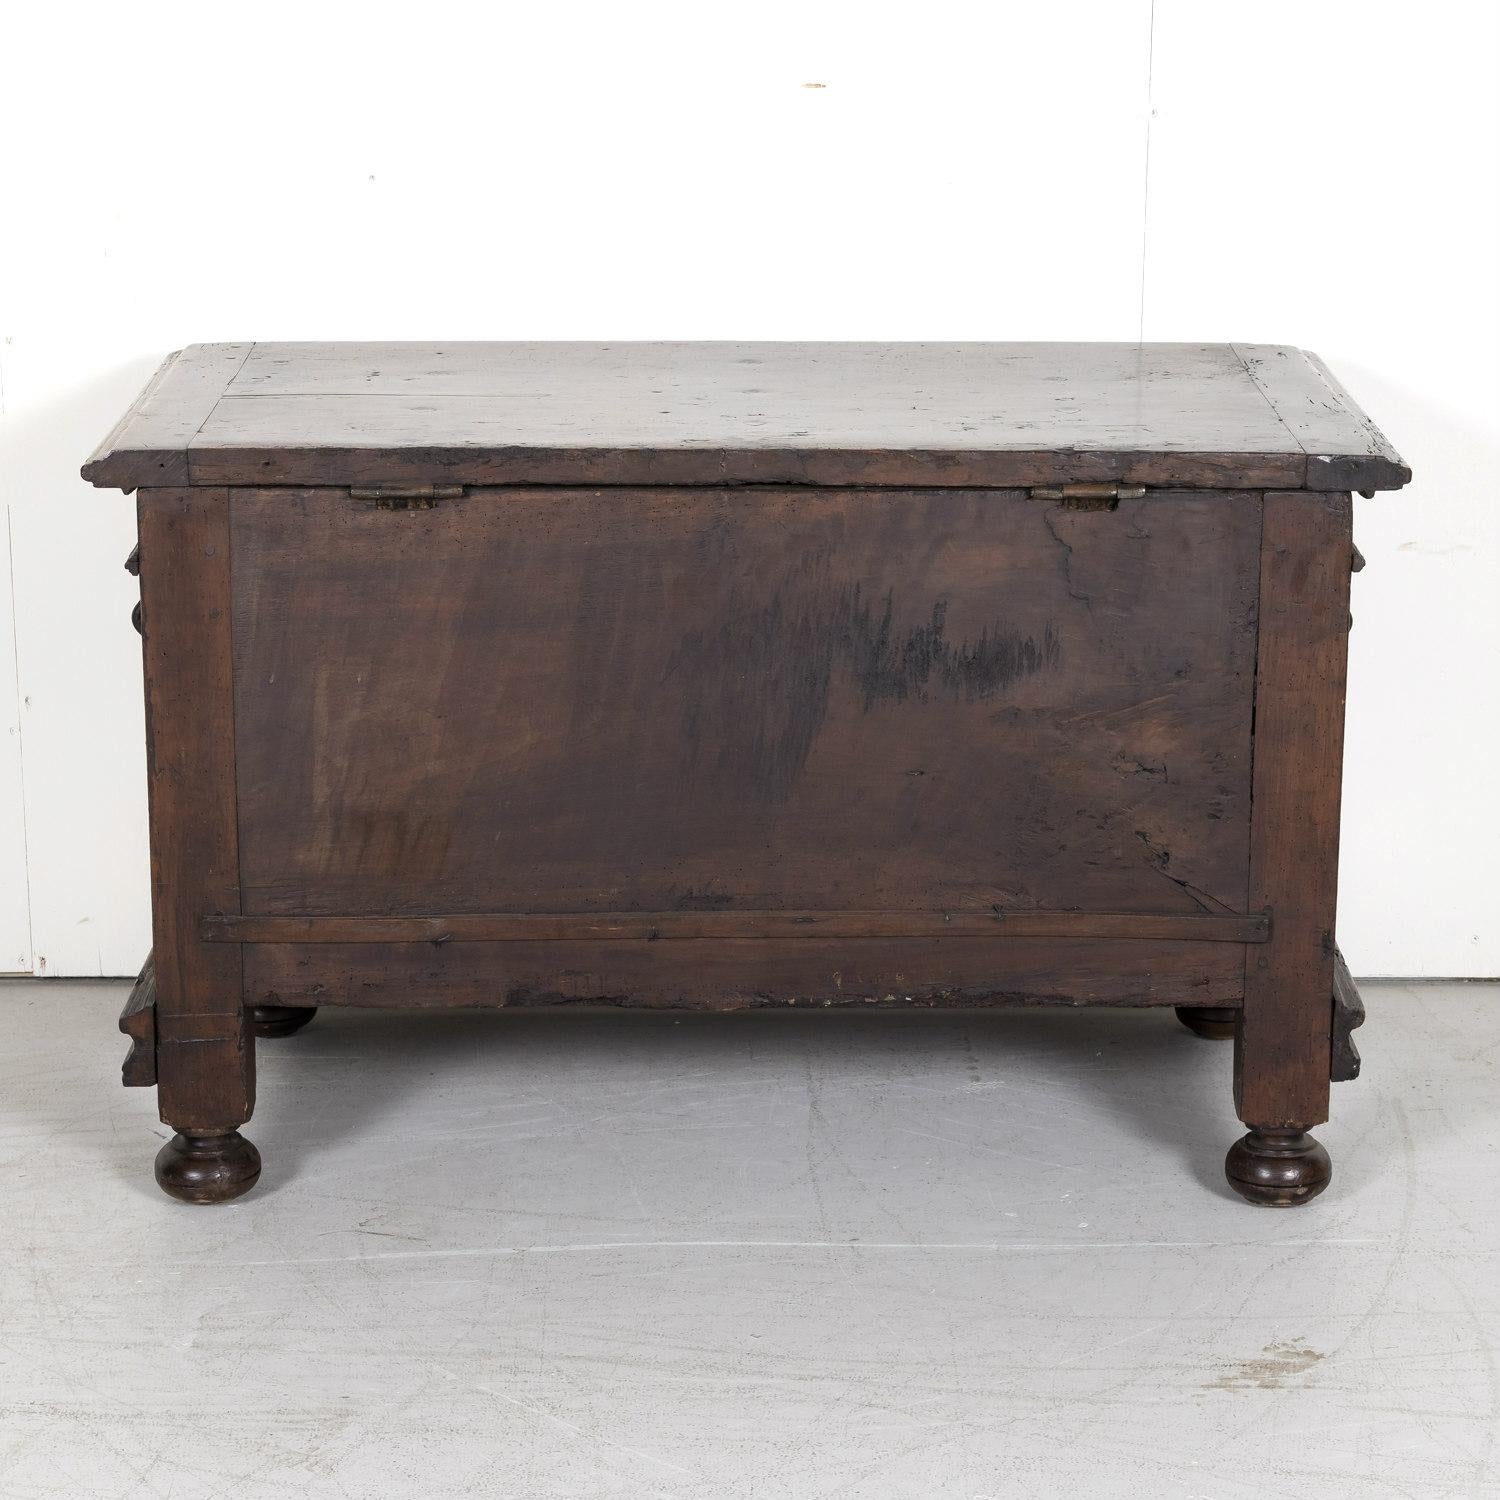 Early 18th Century Louis XIII Style Solid Walnut Coffer or Trunk with Drawer For Sale 15